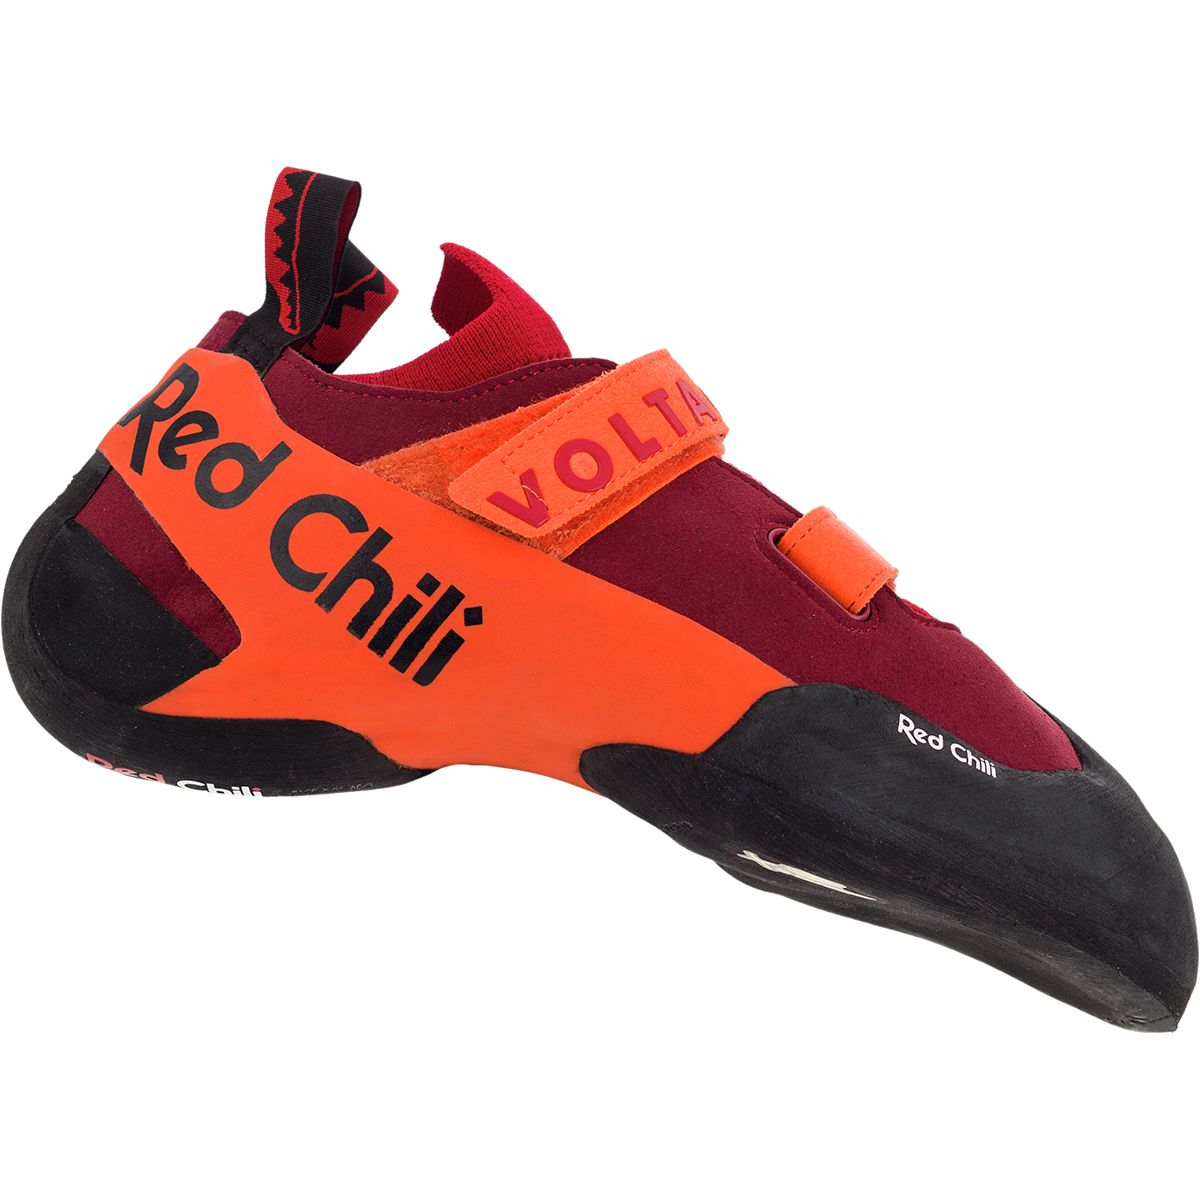 Red Chili Voltage II Climbing Shoe